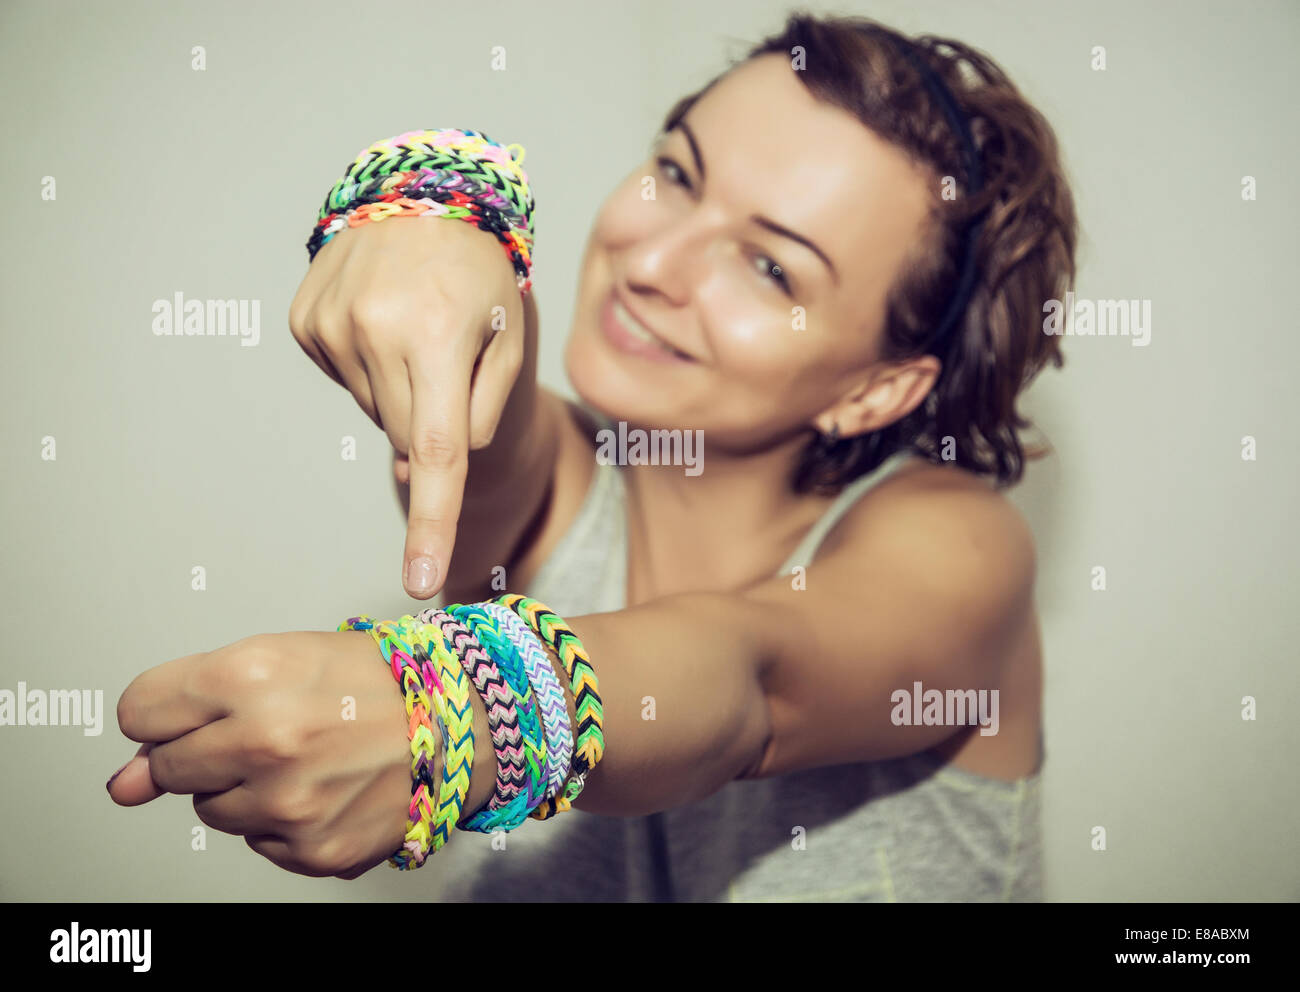 Young girl showing off rainbow loom band bracelets on her wrist Stock Photo  - Alamy